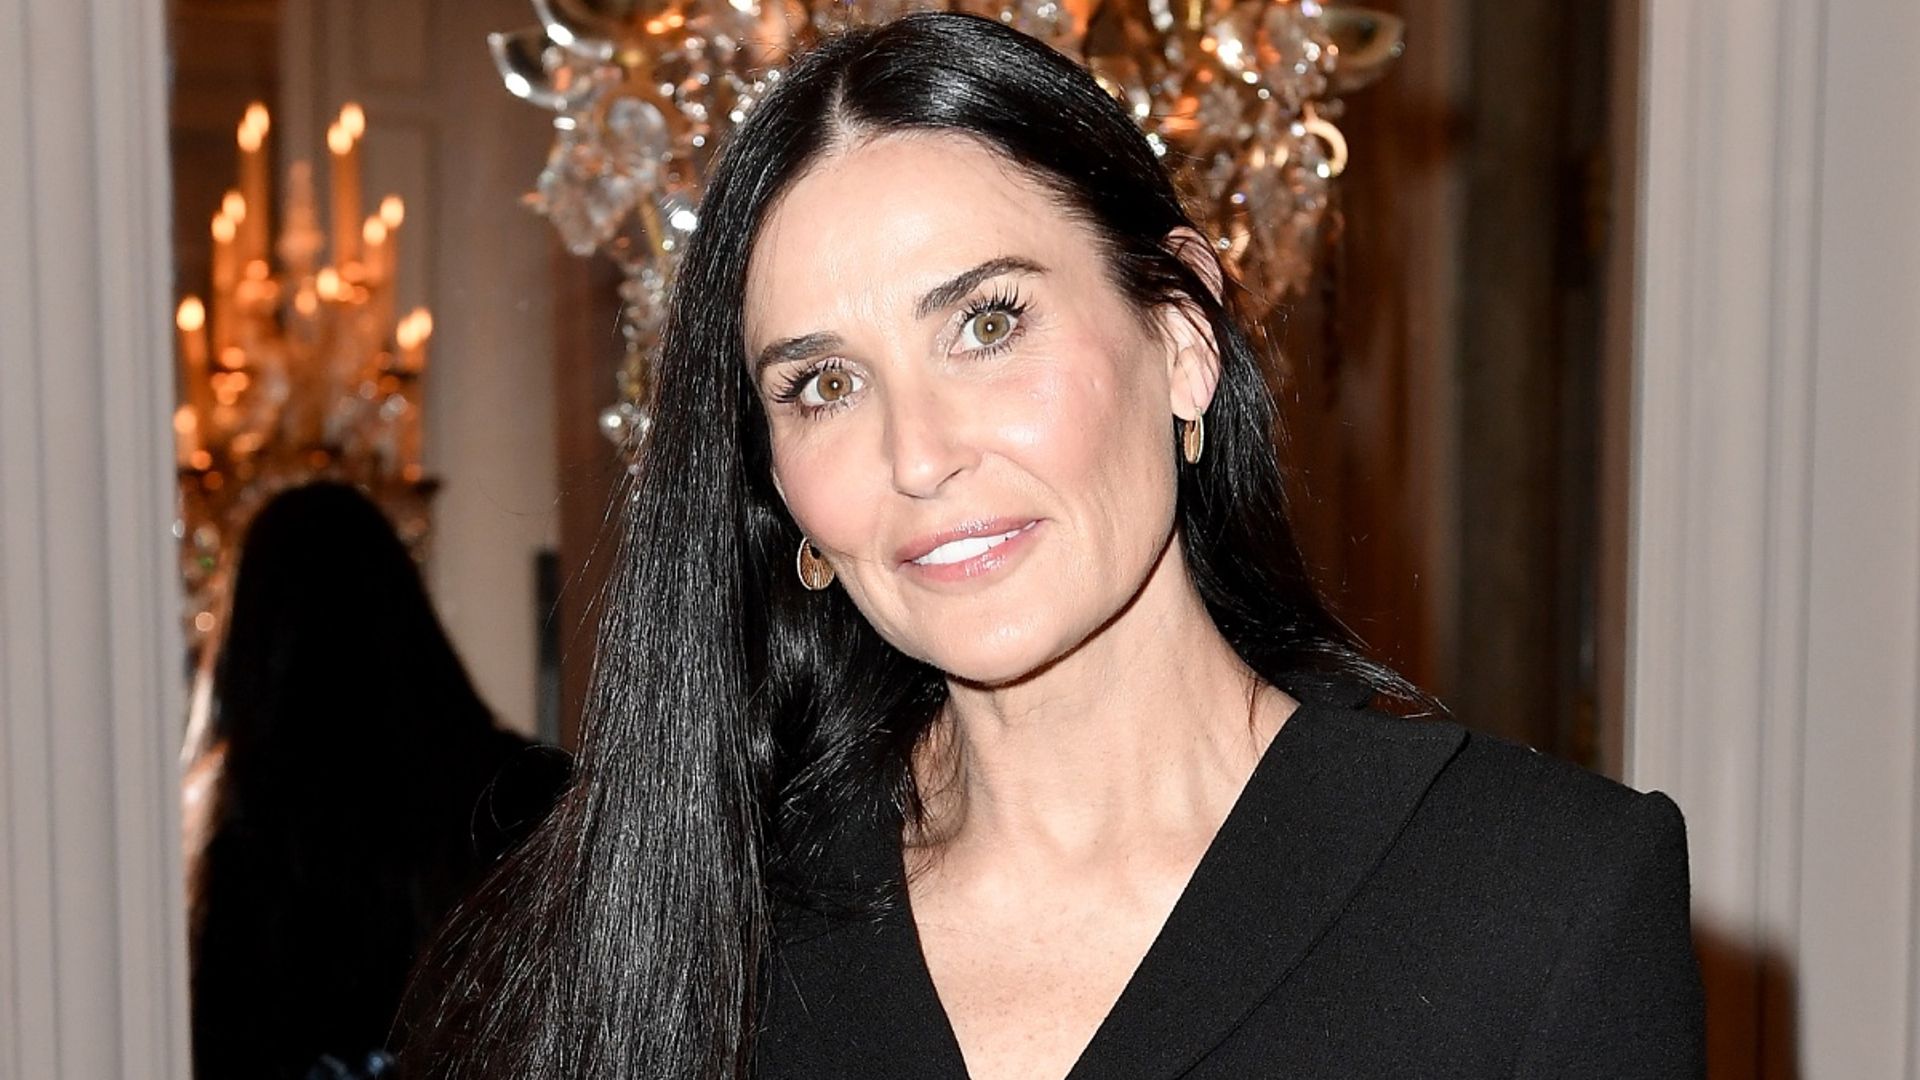 Demi Moore causes a stir with edgy throwback photo